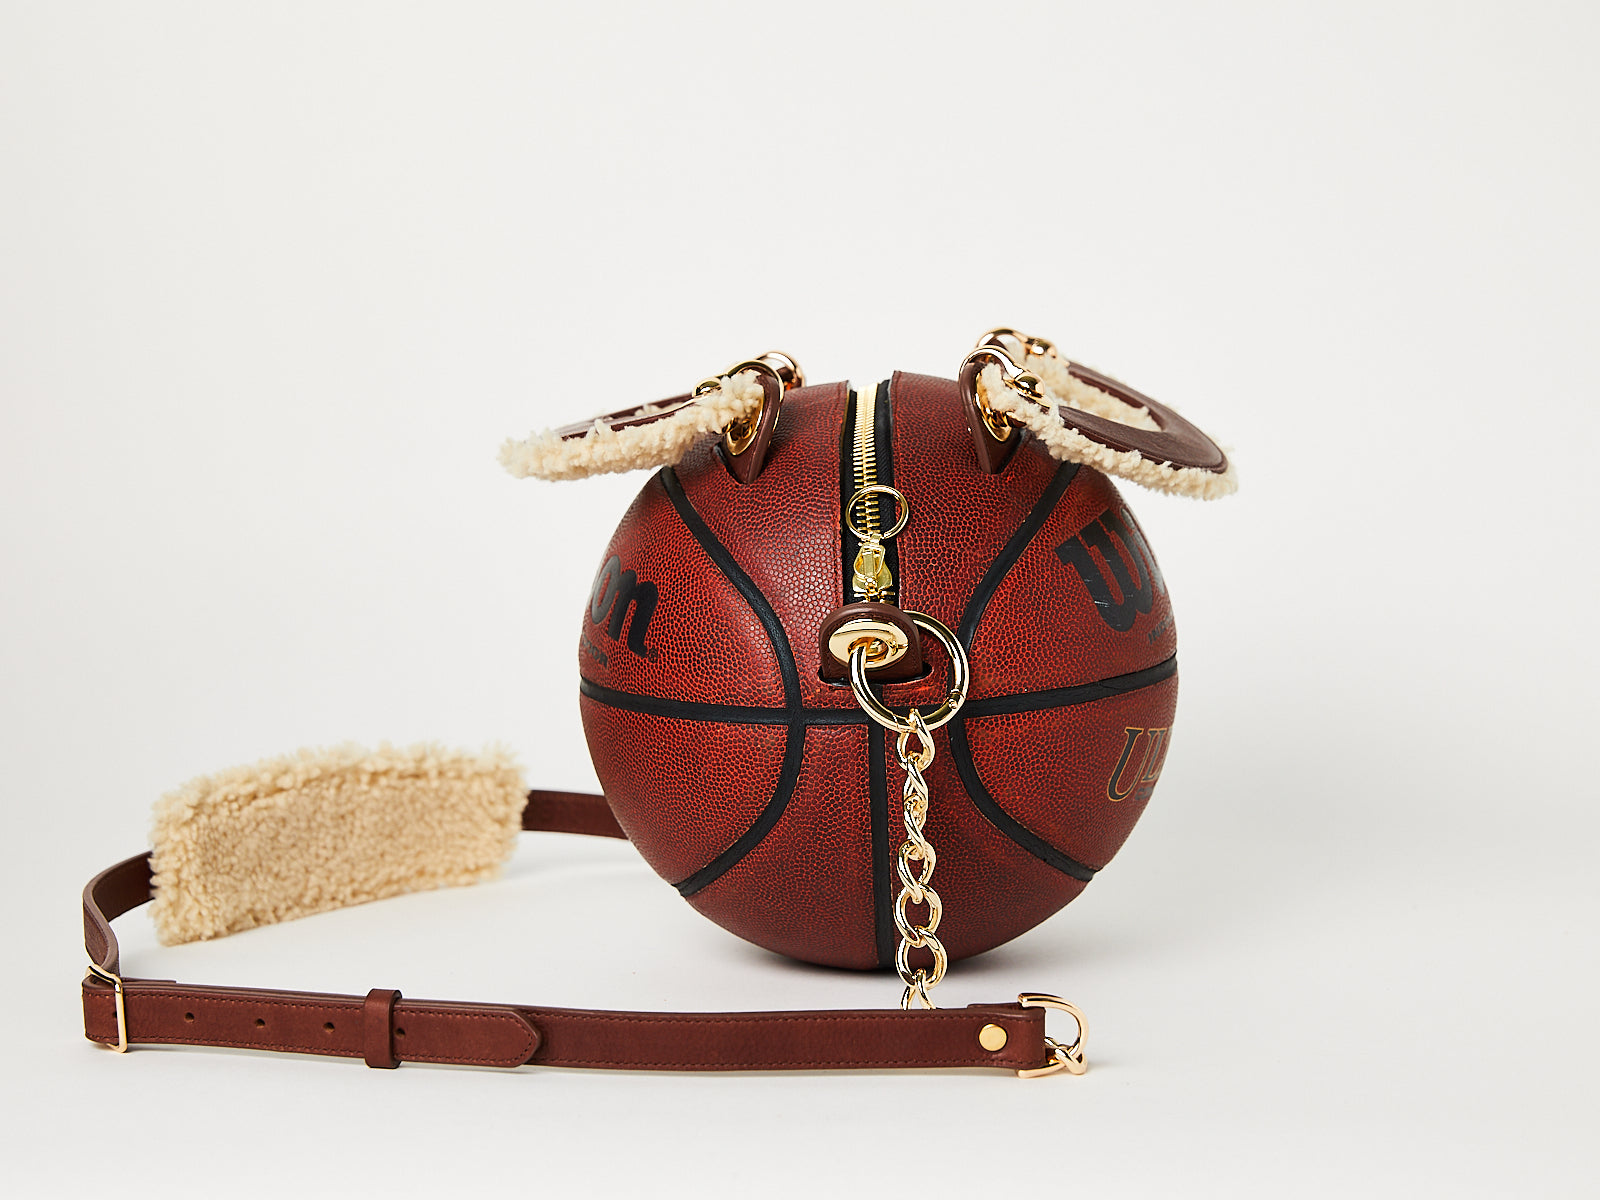 Louis Vuitton NBA Collection Ball in Basket Leather Bag Brown